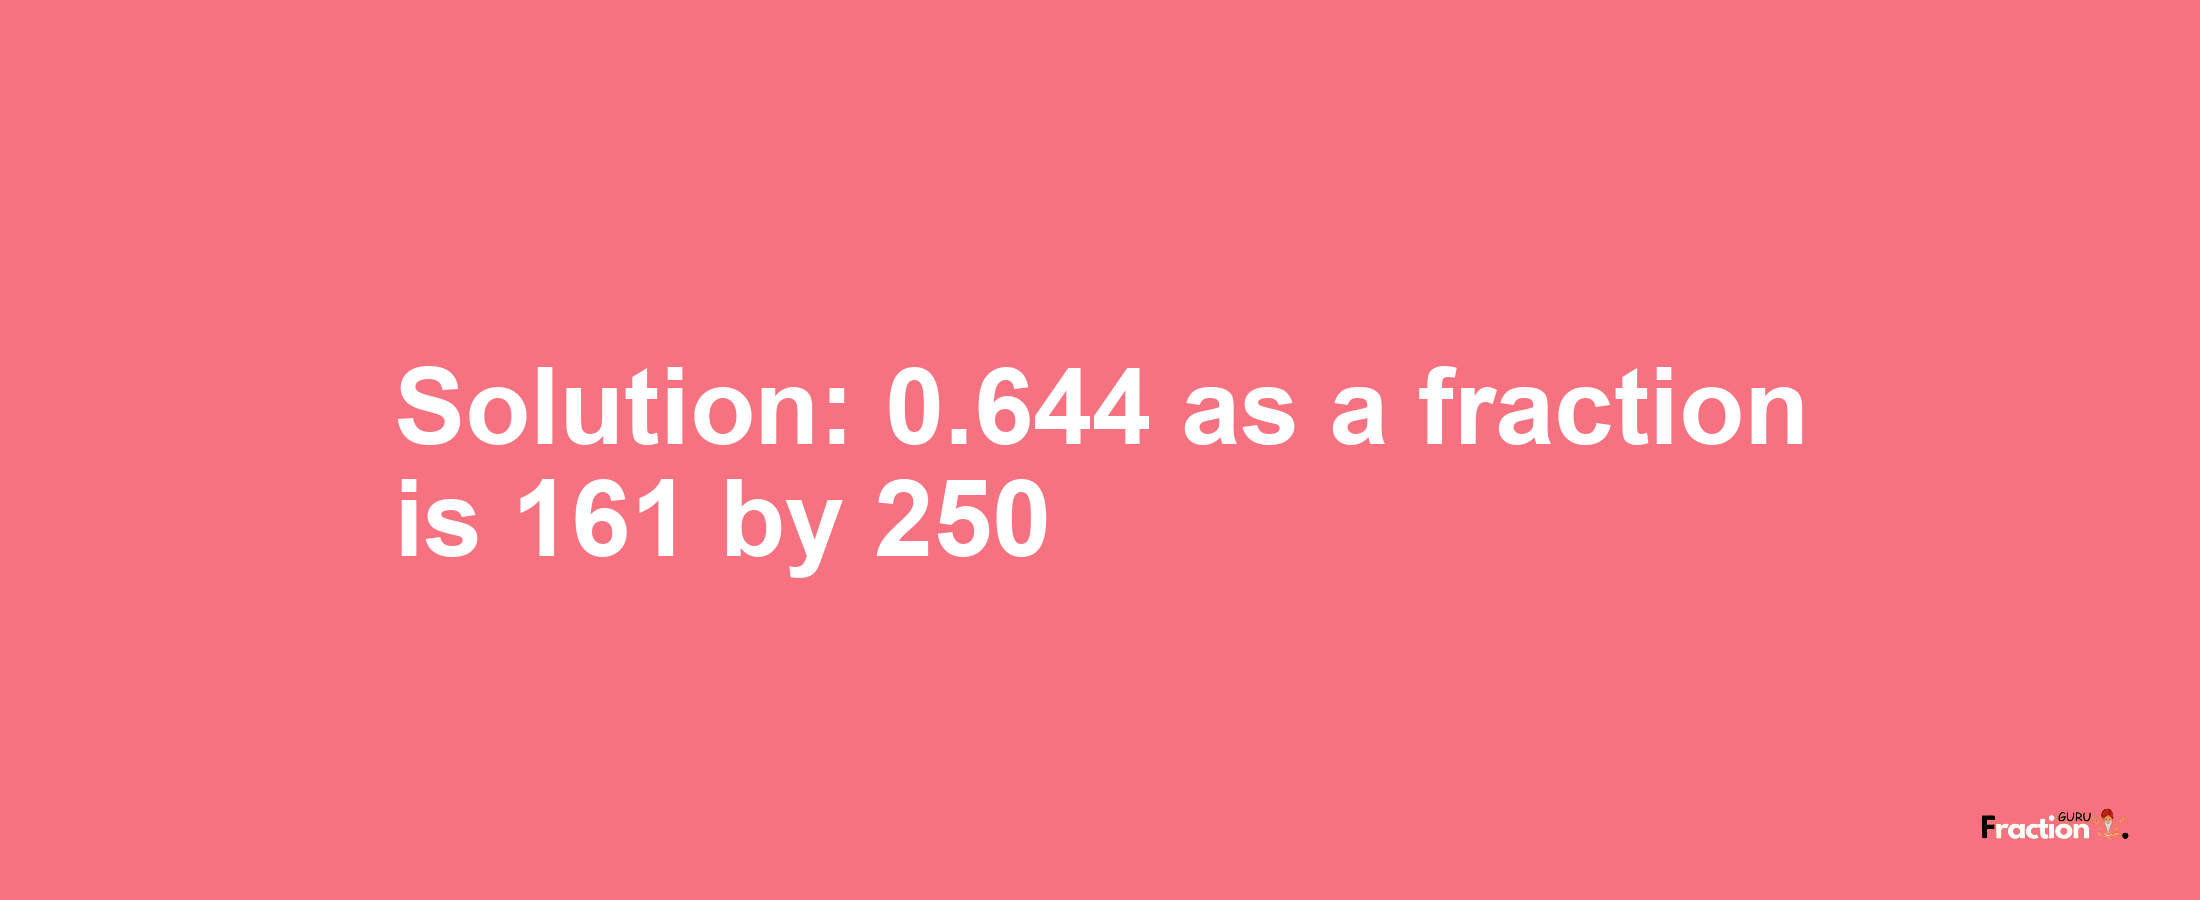 Solution:0.644 as a fraction is 161/250